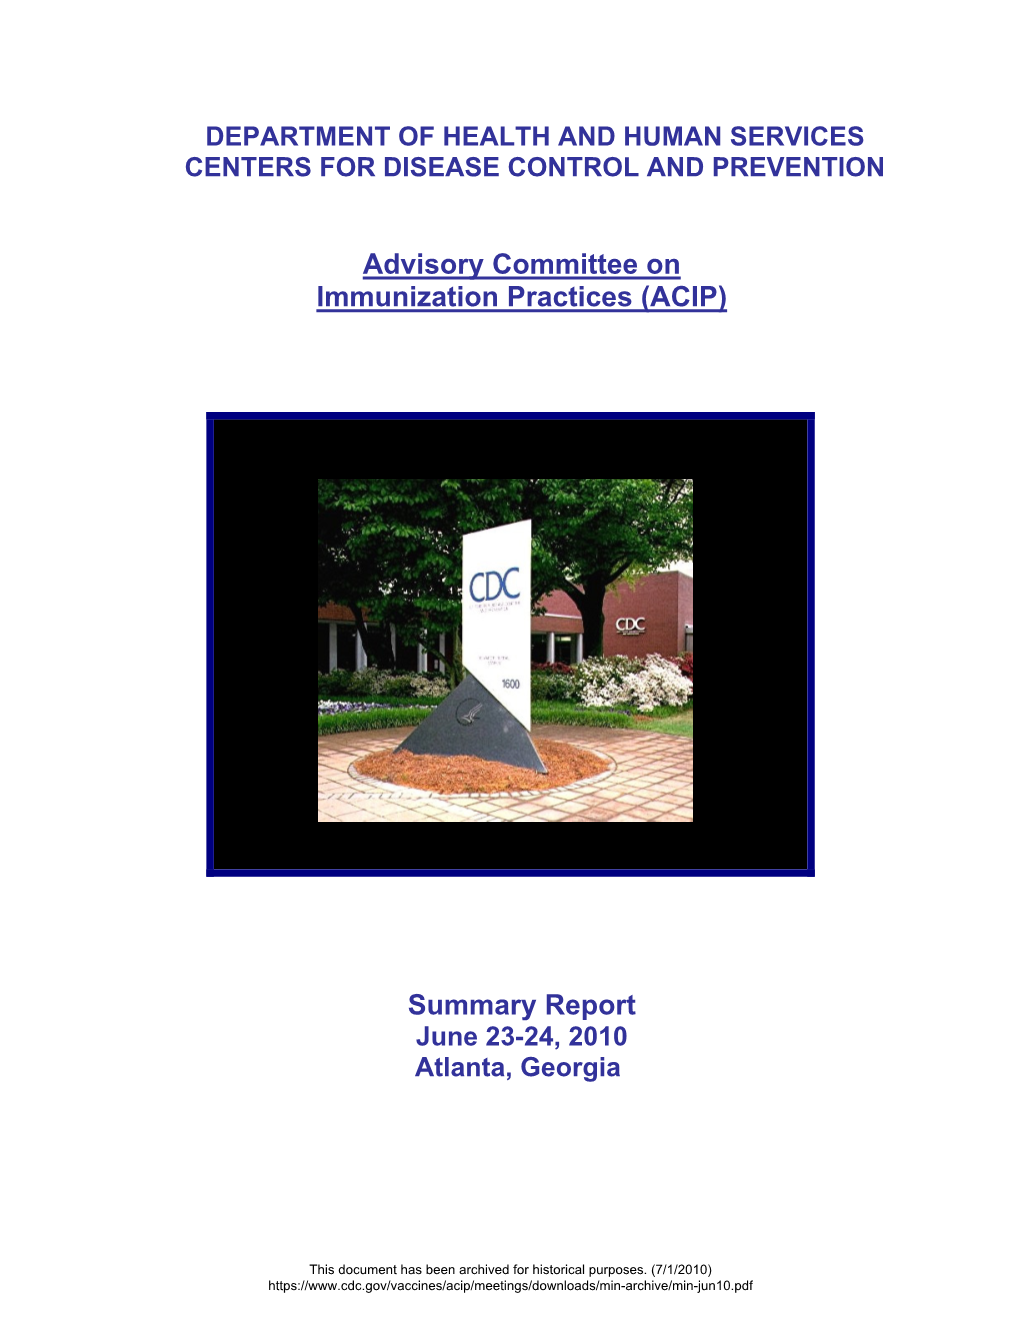 Department of Health and Human Services Centers for Disease Control and Prevention